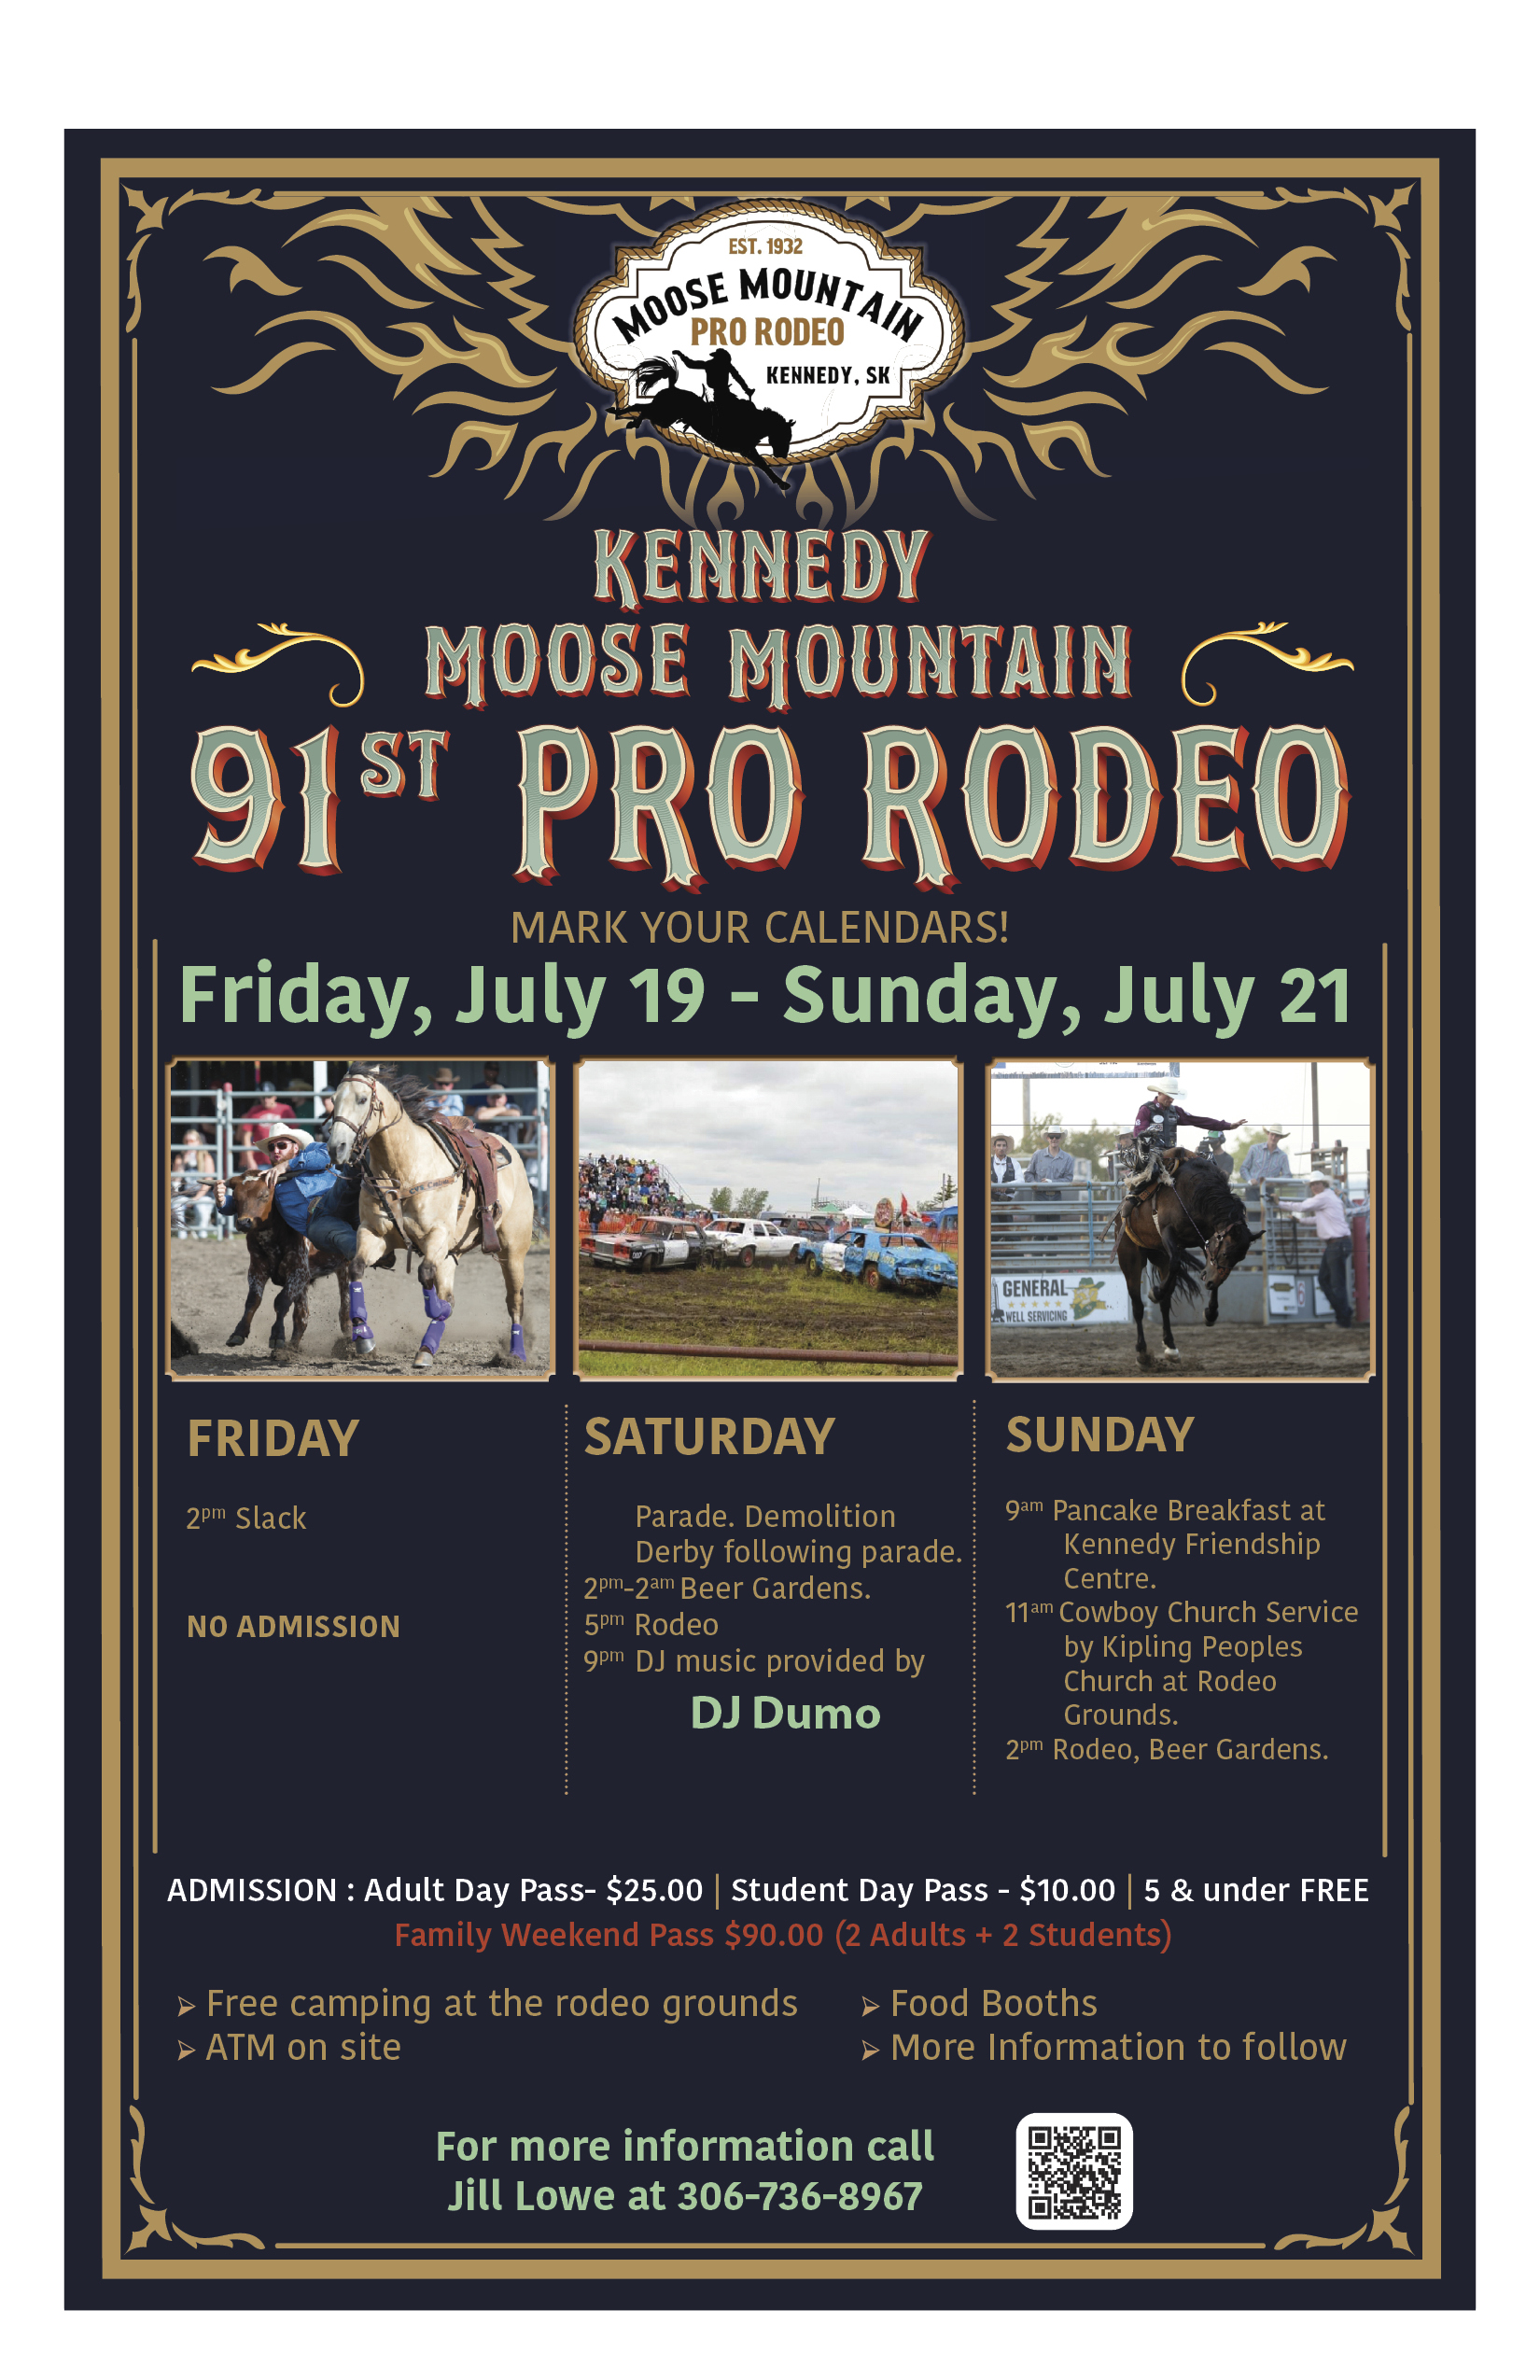 Kennedy Moose Mountain 91st Pro Rodeo